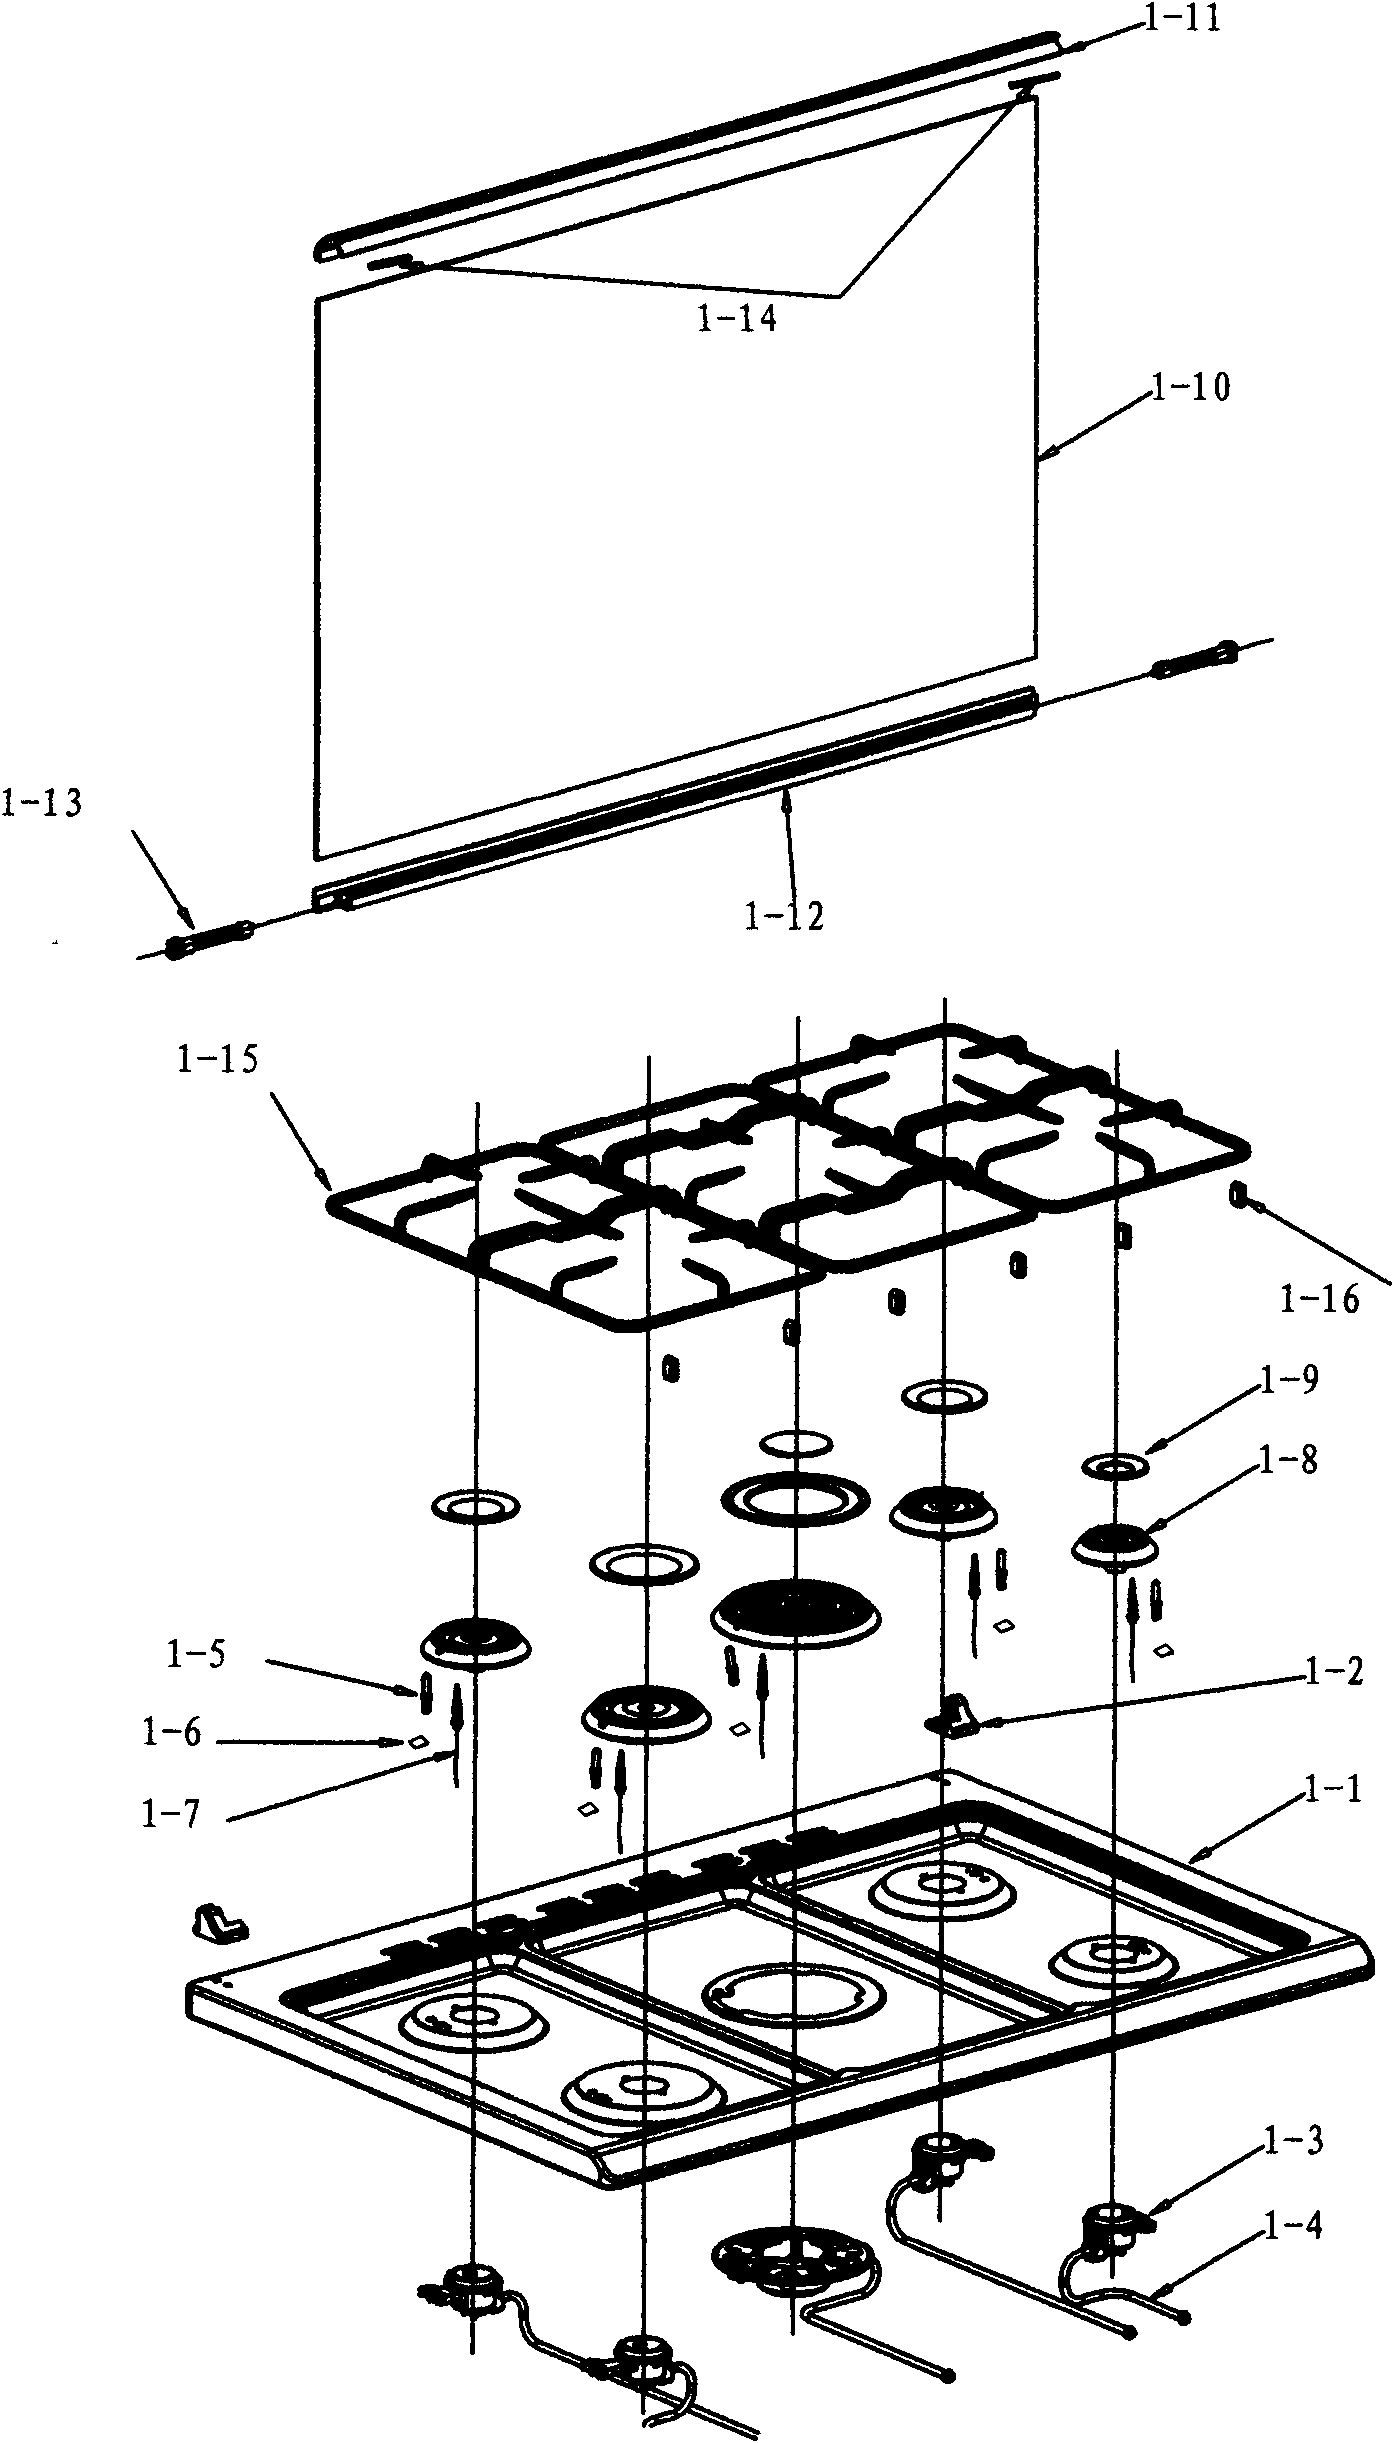 Multi-functional oven for cooking food and storing objects